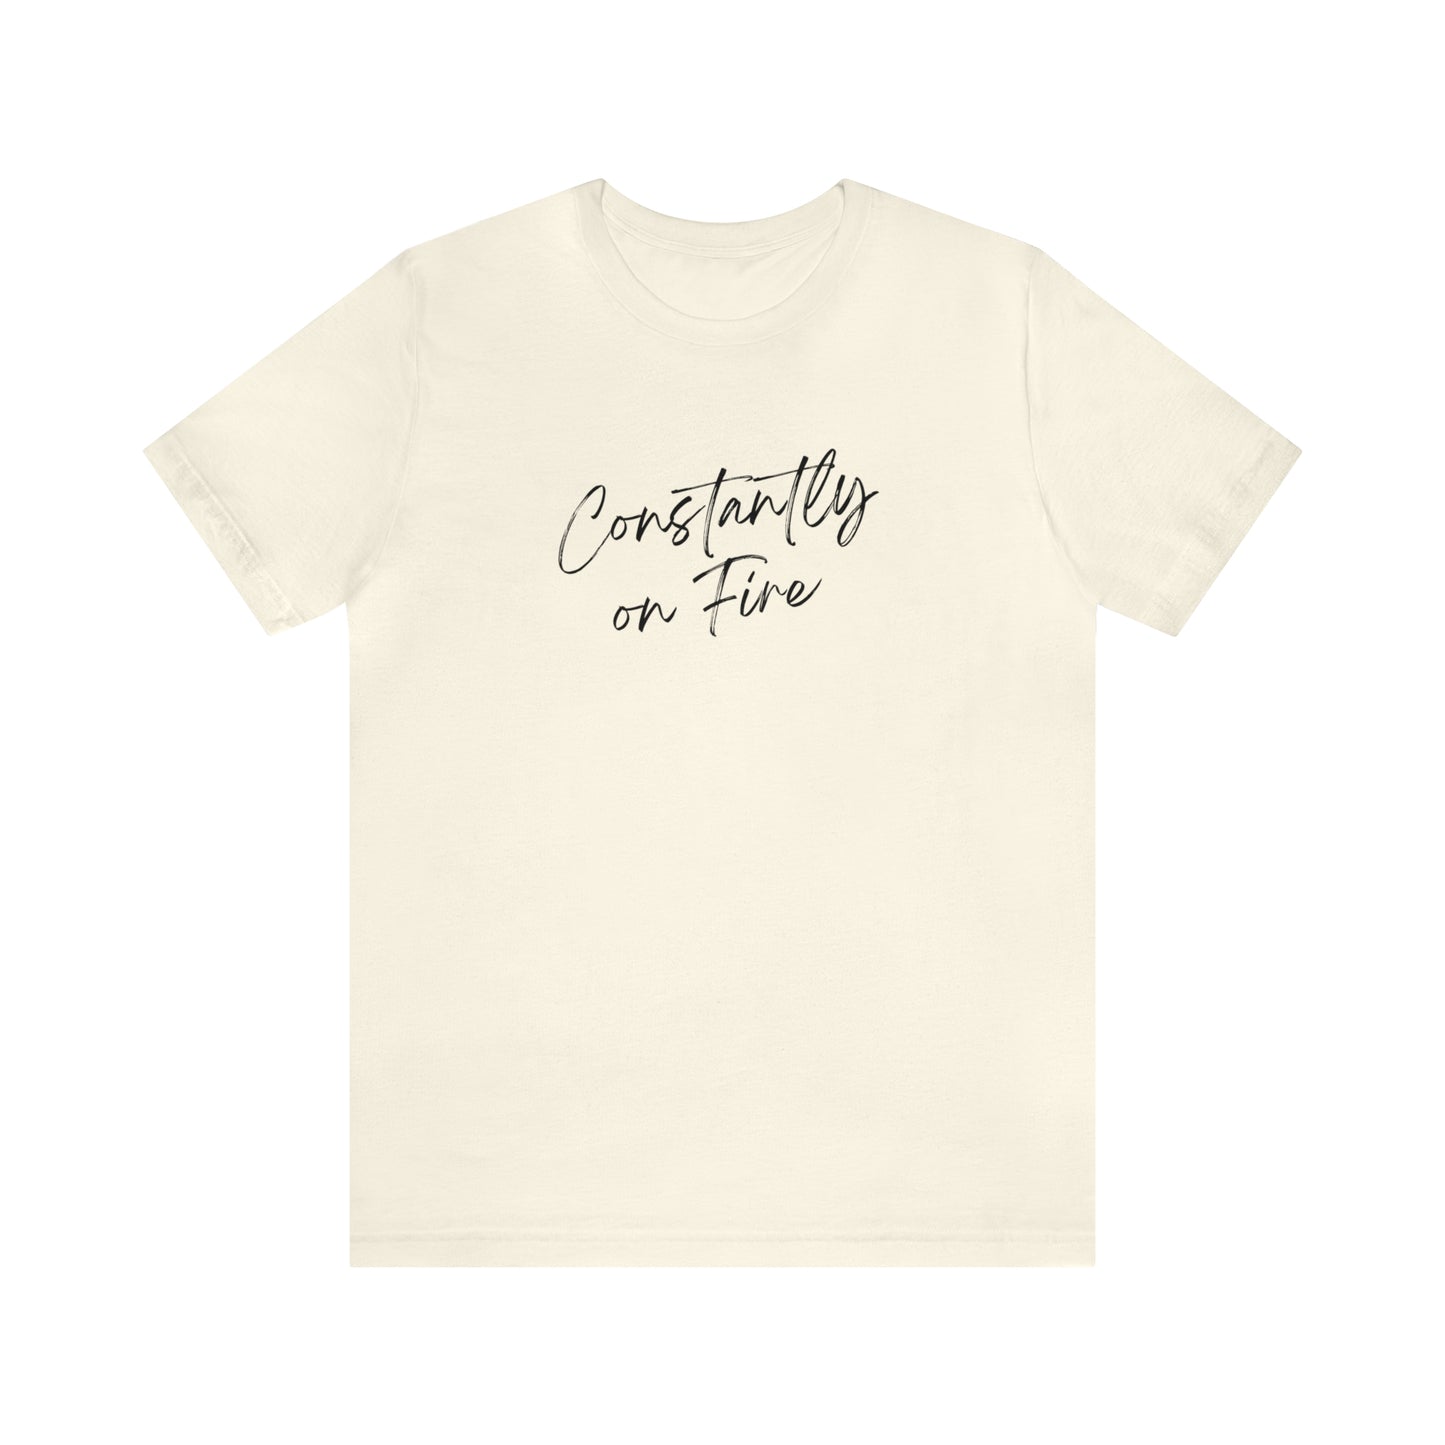 Constantly on Fire Jersey Short Sleeve T-shirt